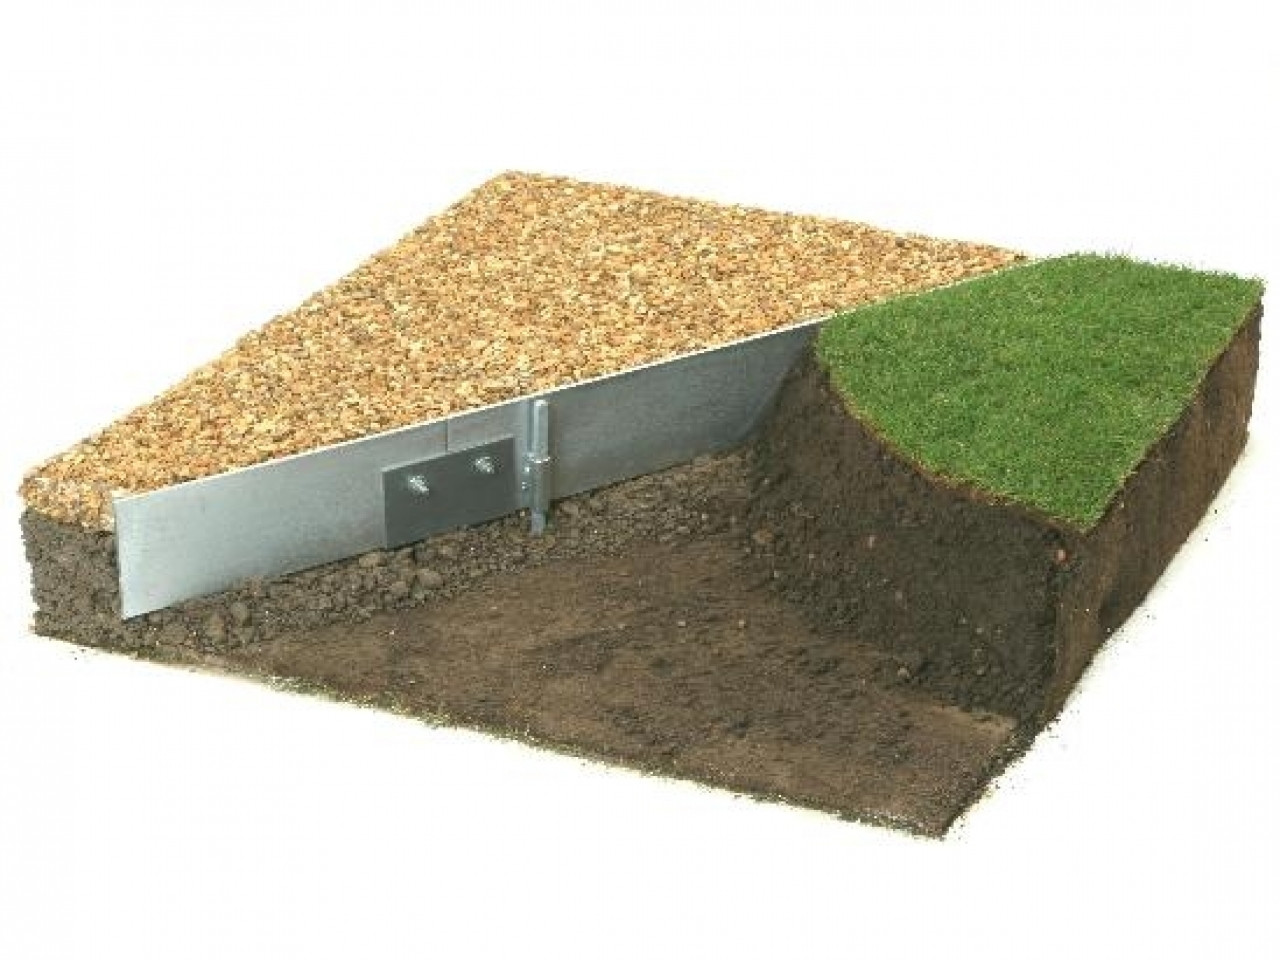 Landscape Edging Lowes
 23 Awesome Metal Landscape Edging Lowes Home Family